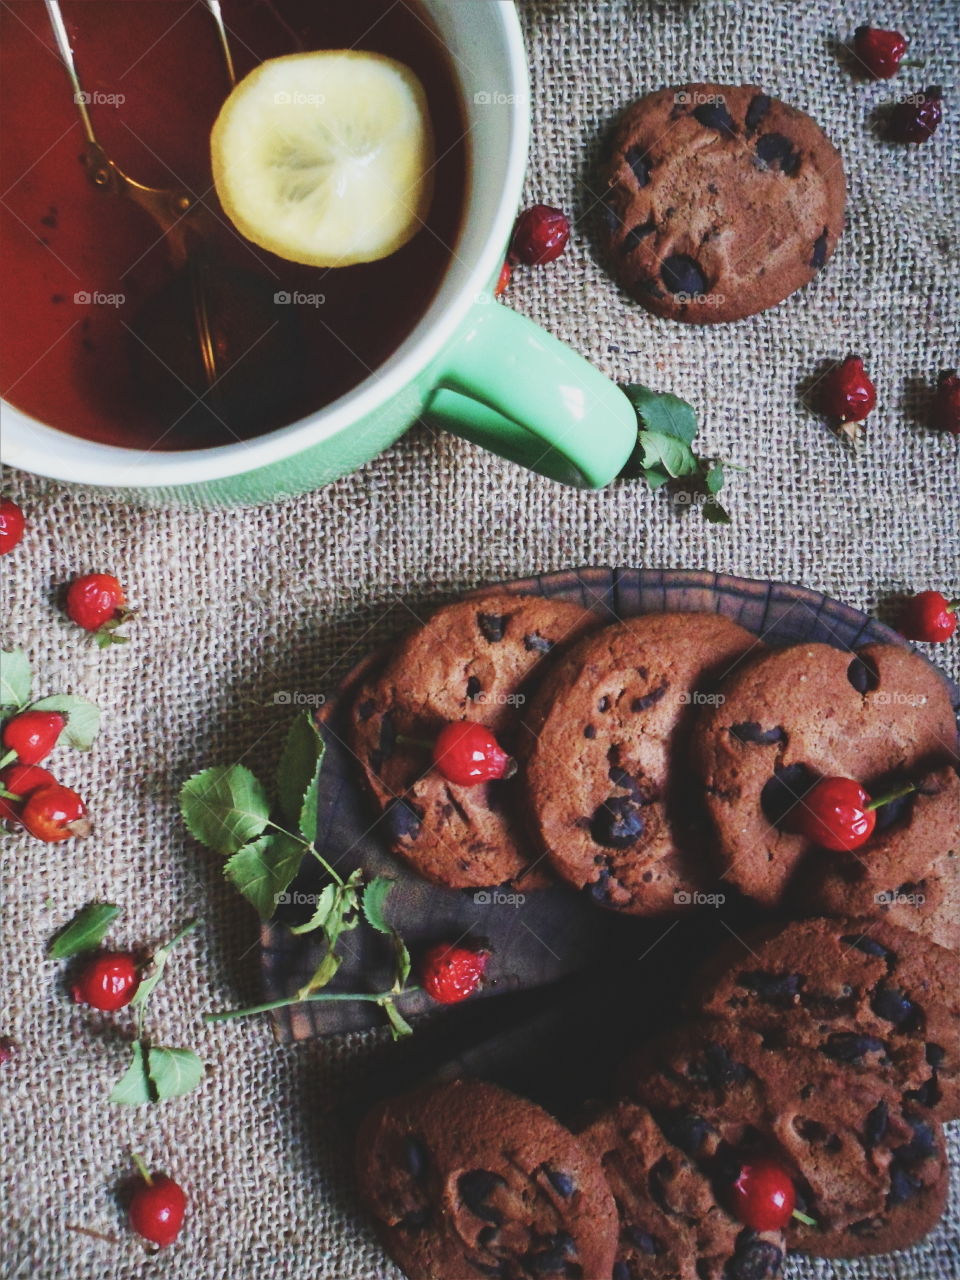 oatmeal cookies with chunks of chocolate and a cup of tea, dessert